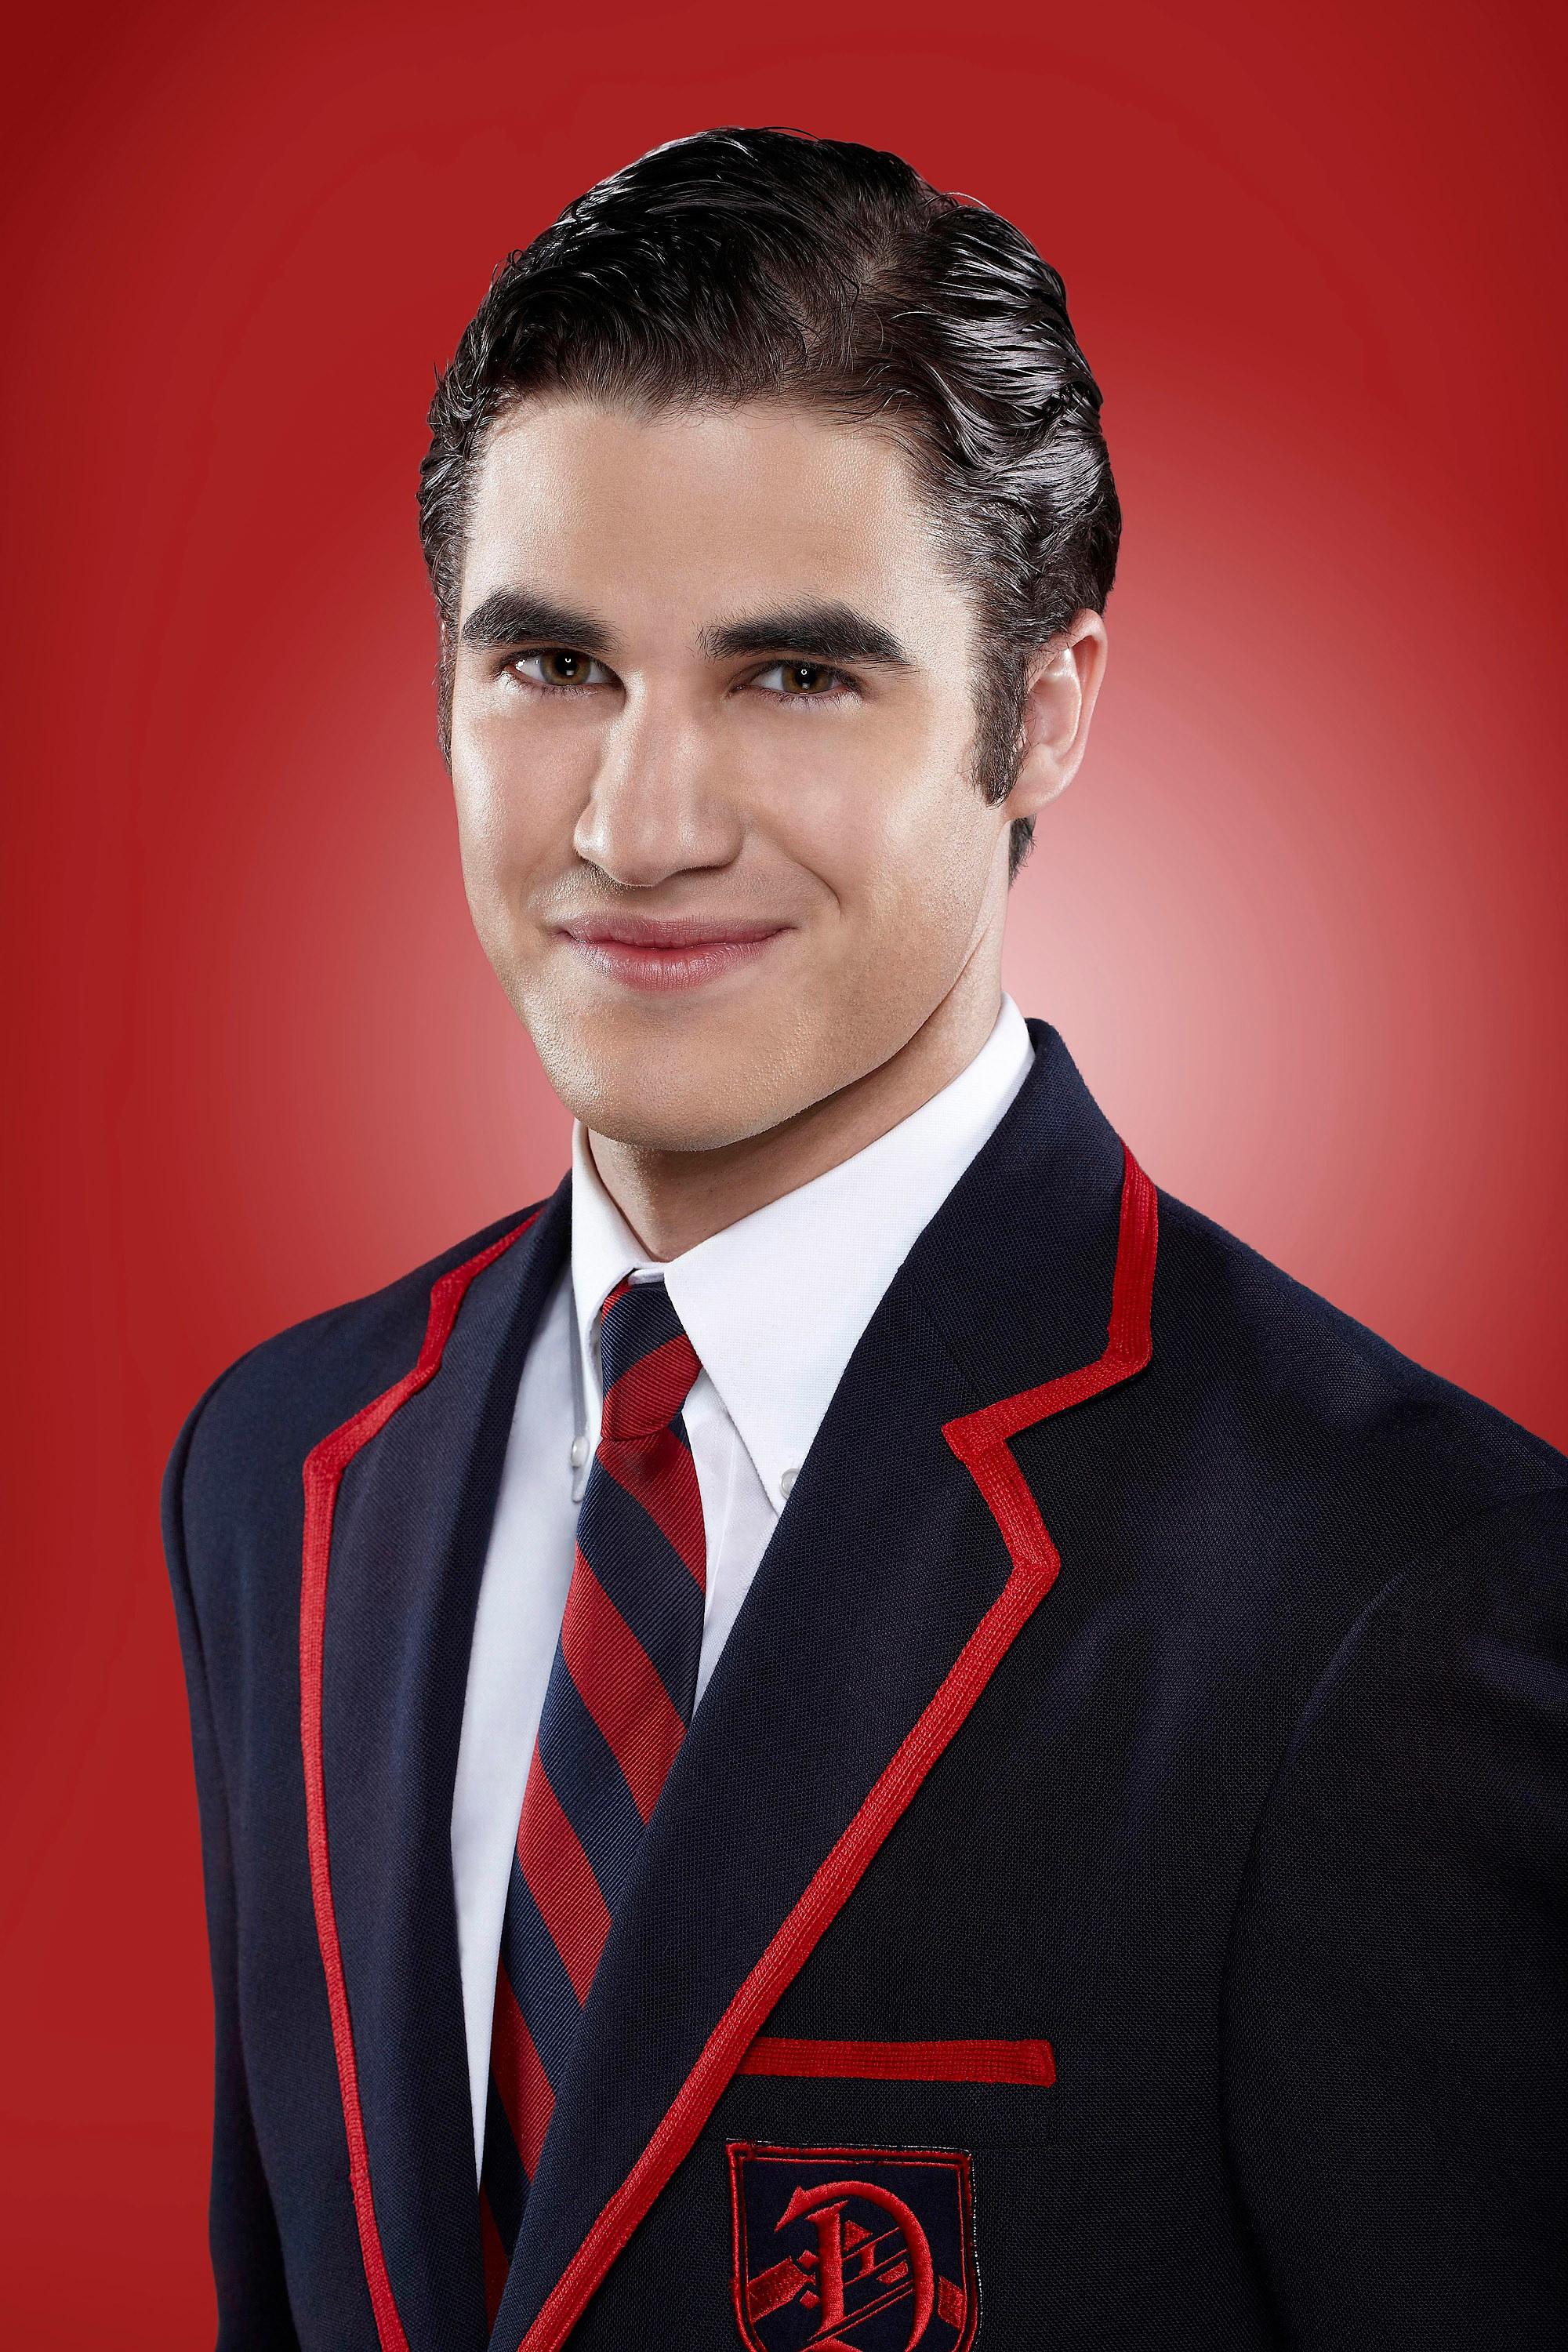 Darren Criss as Blaine smiles in a promotional photo for &quot;Glee&quot;